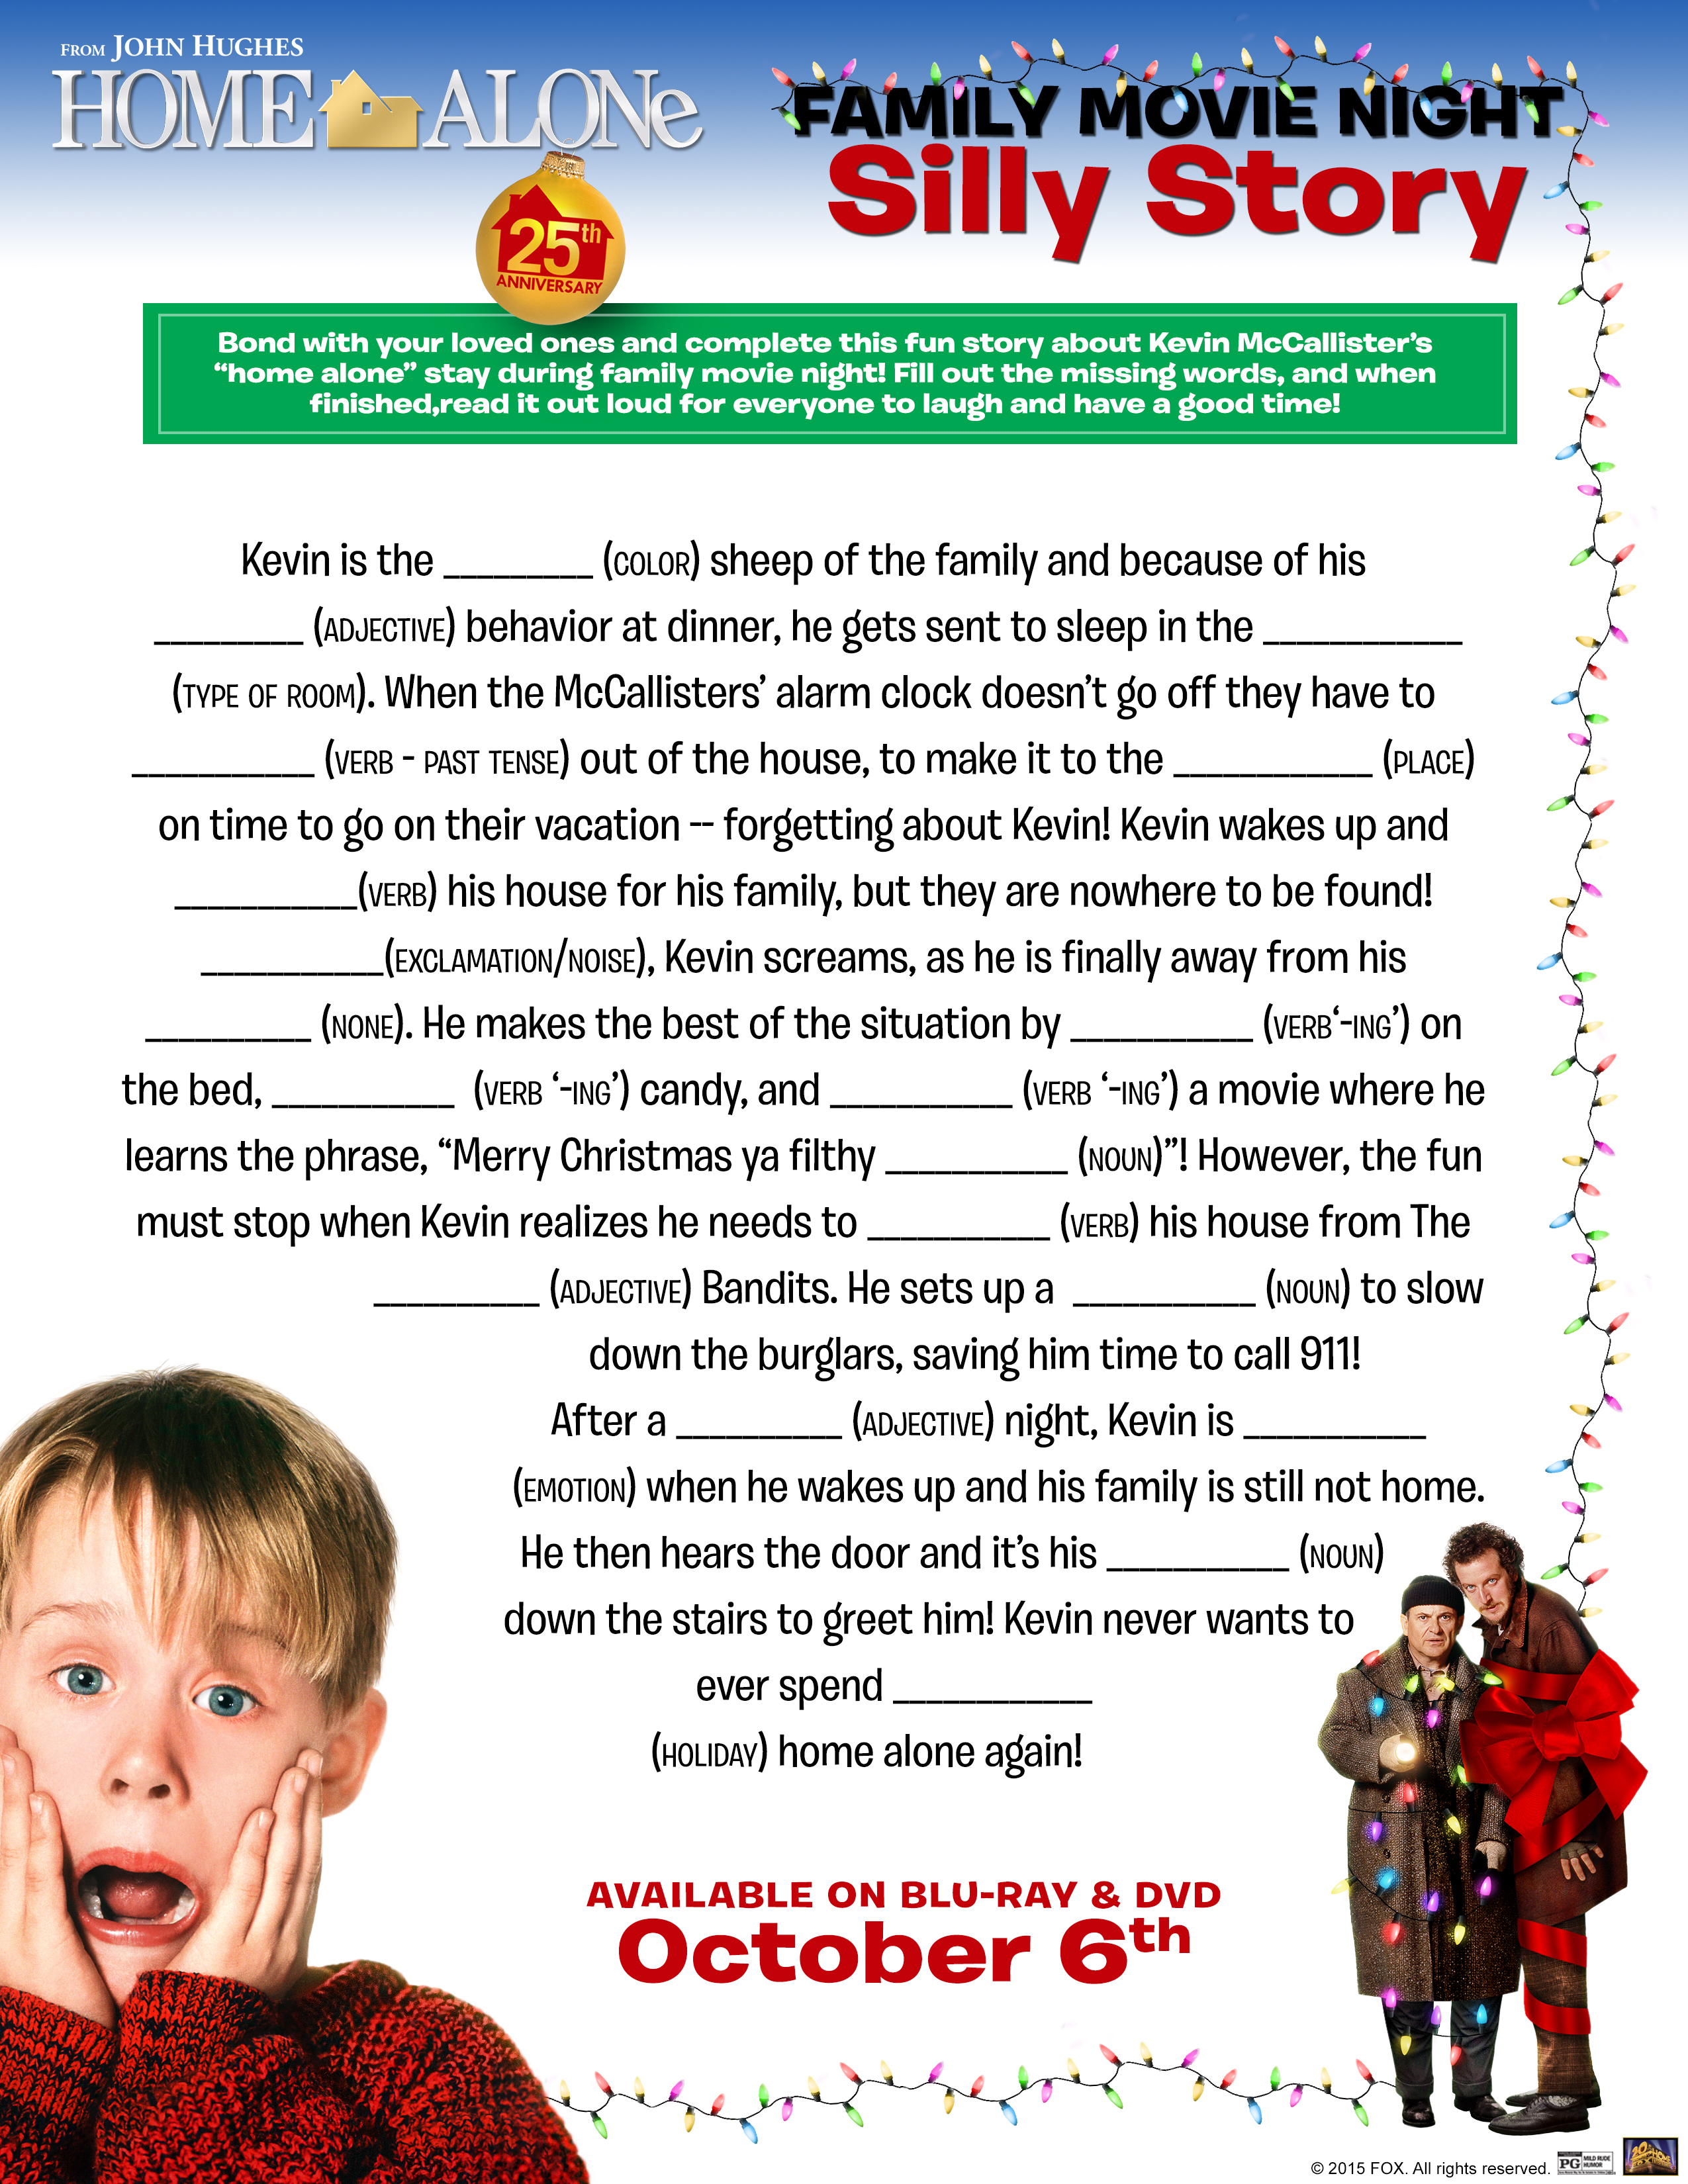 Introducing your child to the home alone movies